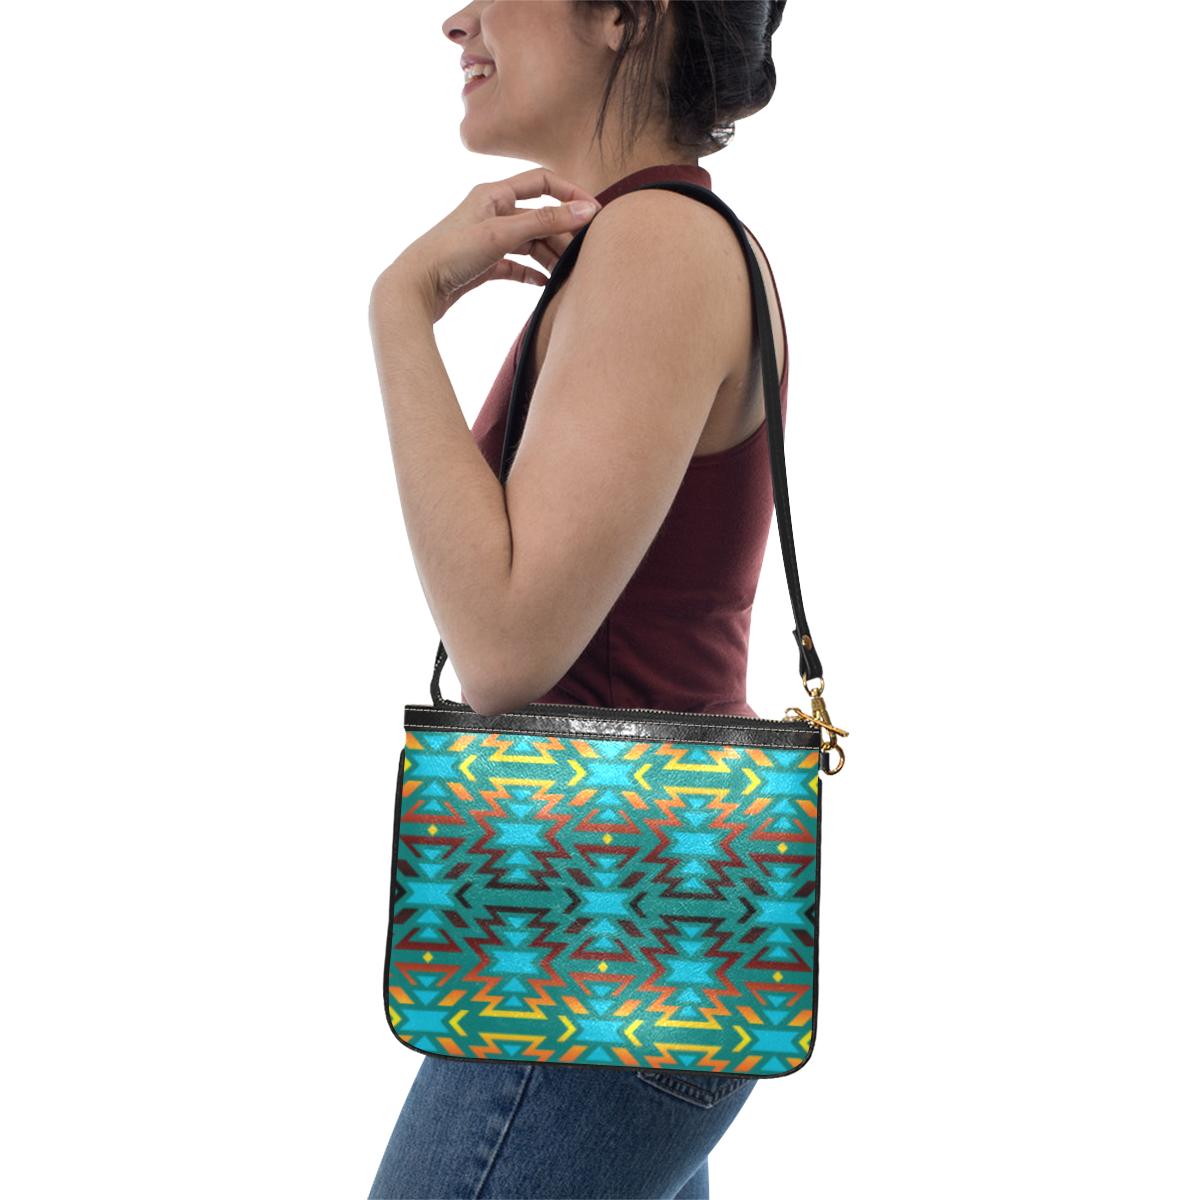 Fire Colors and Turquoise Teal Small Shoulder Bag (Model 1710) Small Shoulder Bag (1710) e-joyer 